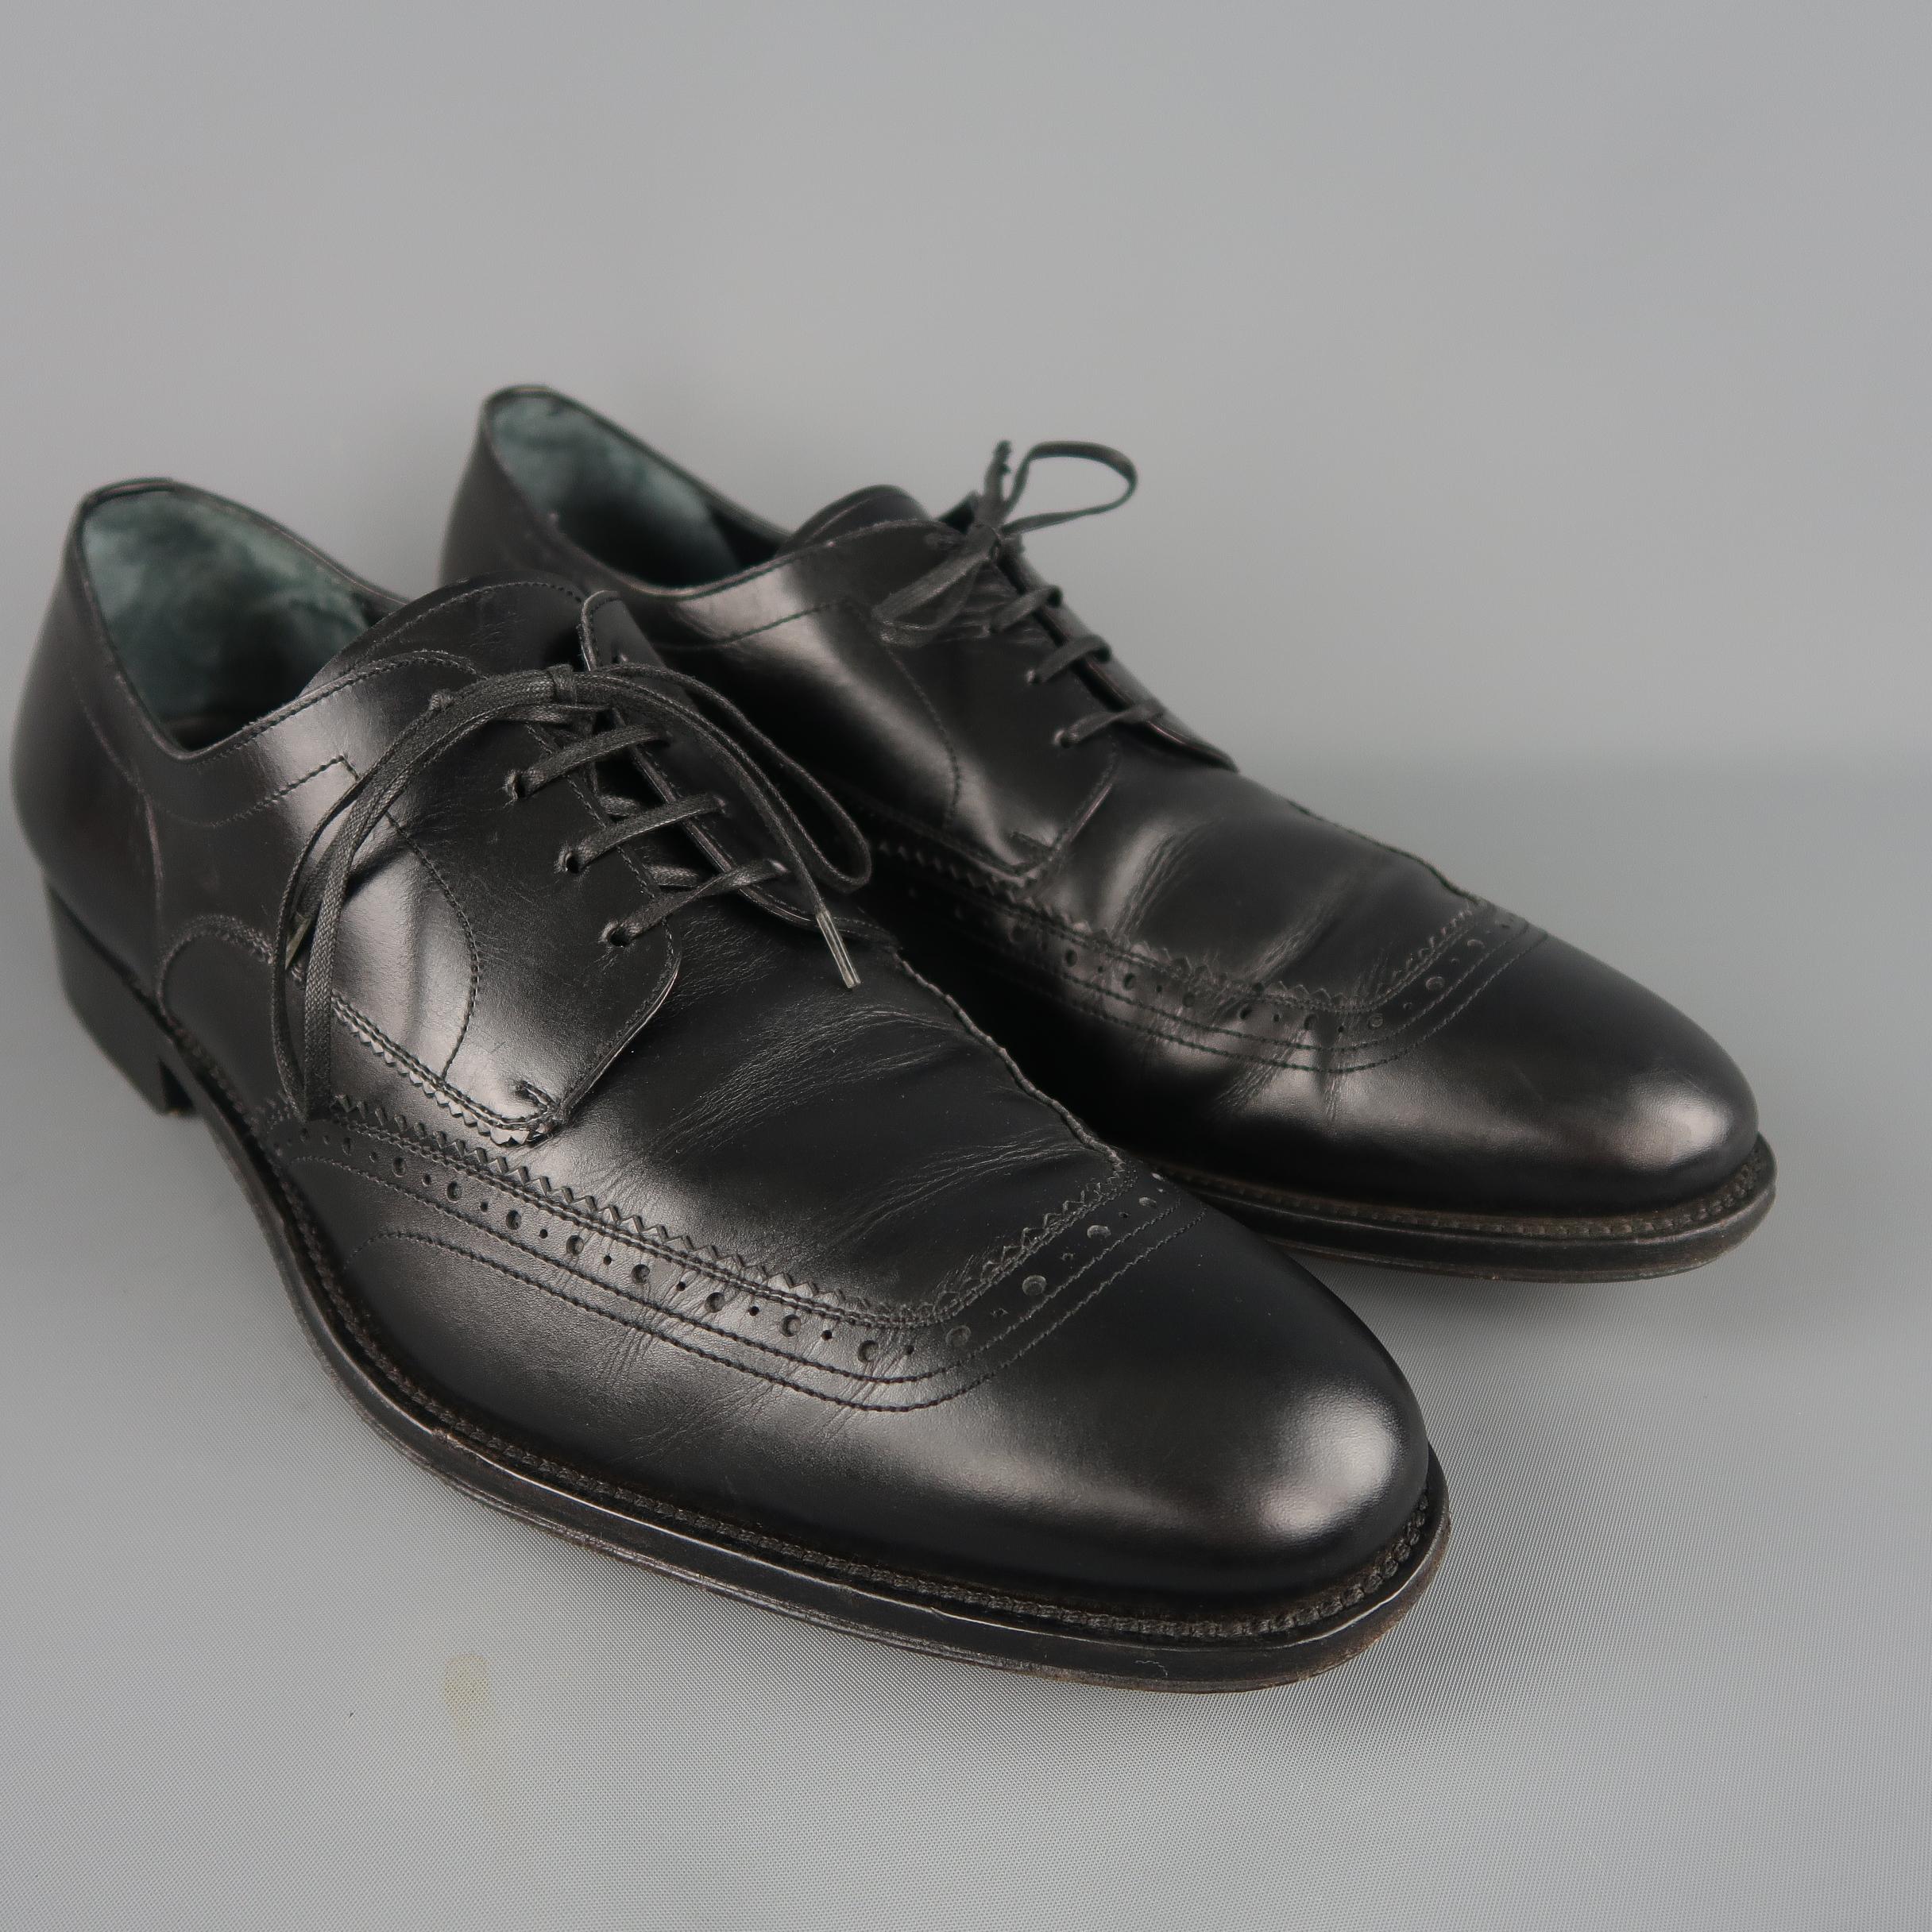 Salvatore Ferragamo dress shoes come in smooth leather with a tapered toe and perforated brogue piping details. Made in Italy.
 
Good Pre-Owned Condition
Marked Size: 11 D